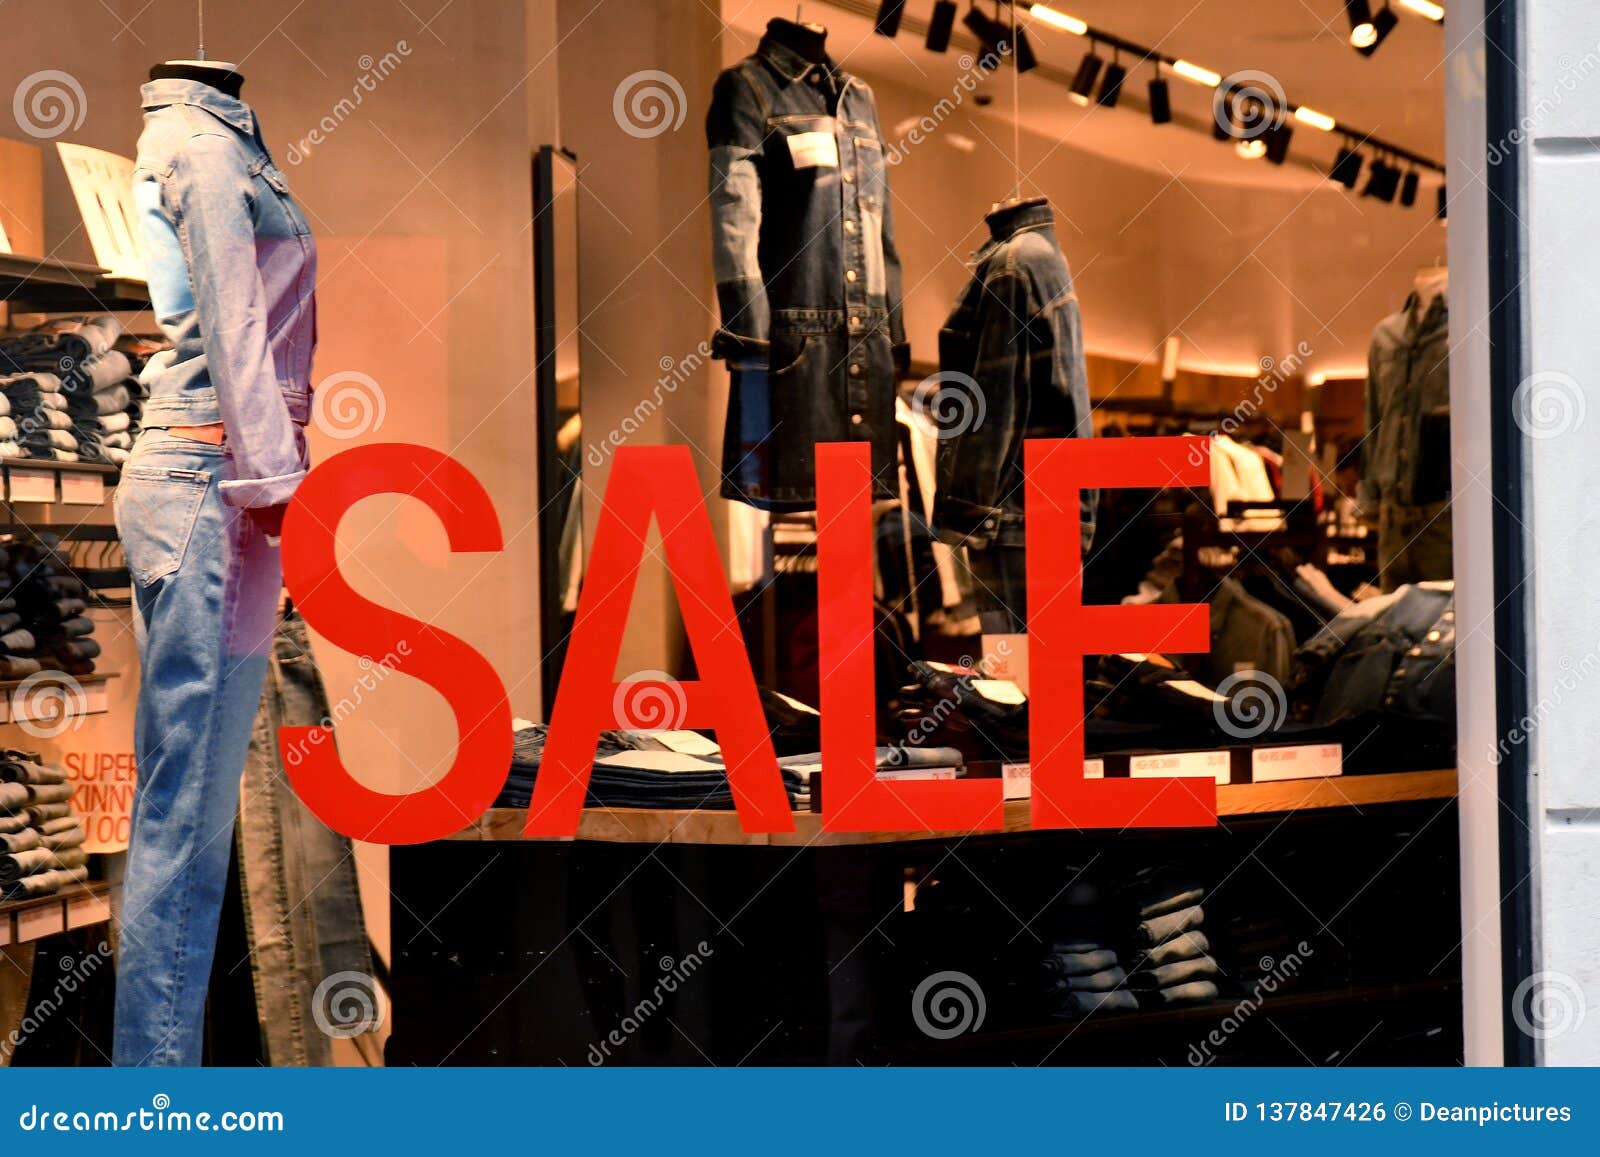 AMERICAN RETAIL STORE CALVIN KLEIN SALE Editorial Photo - Image of europe, jeans: 137847426